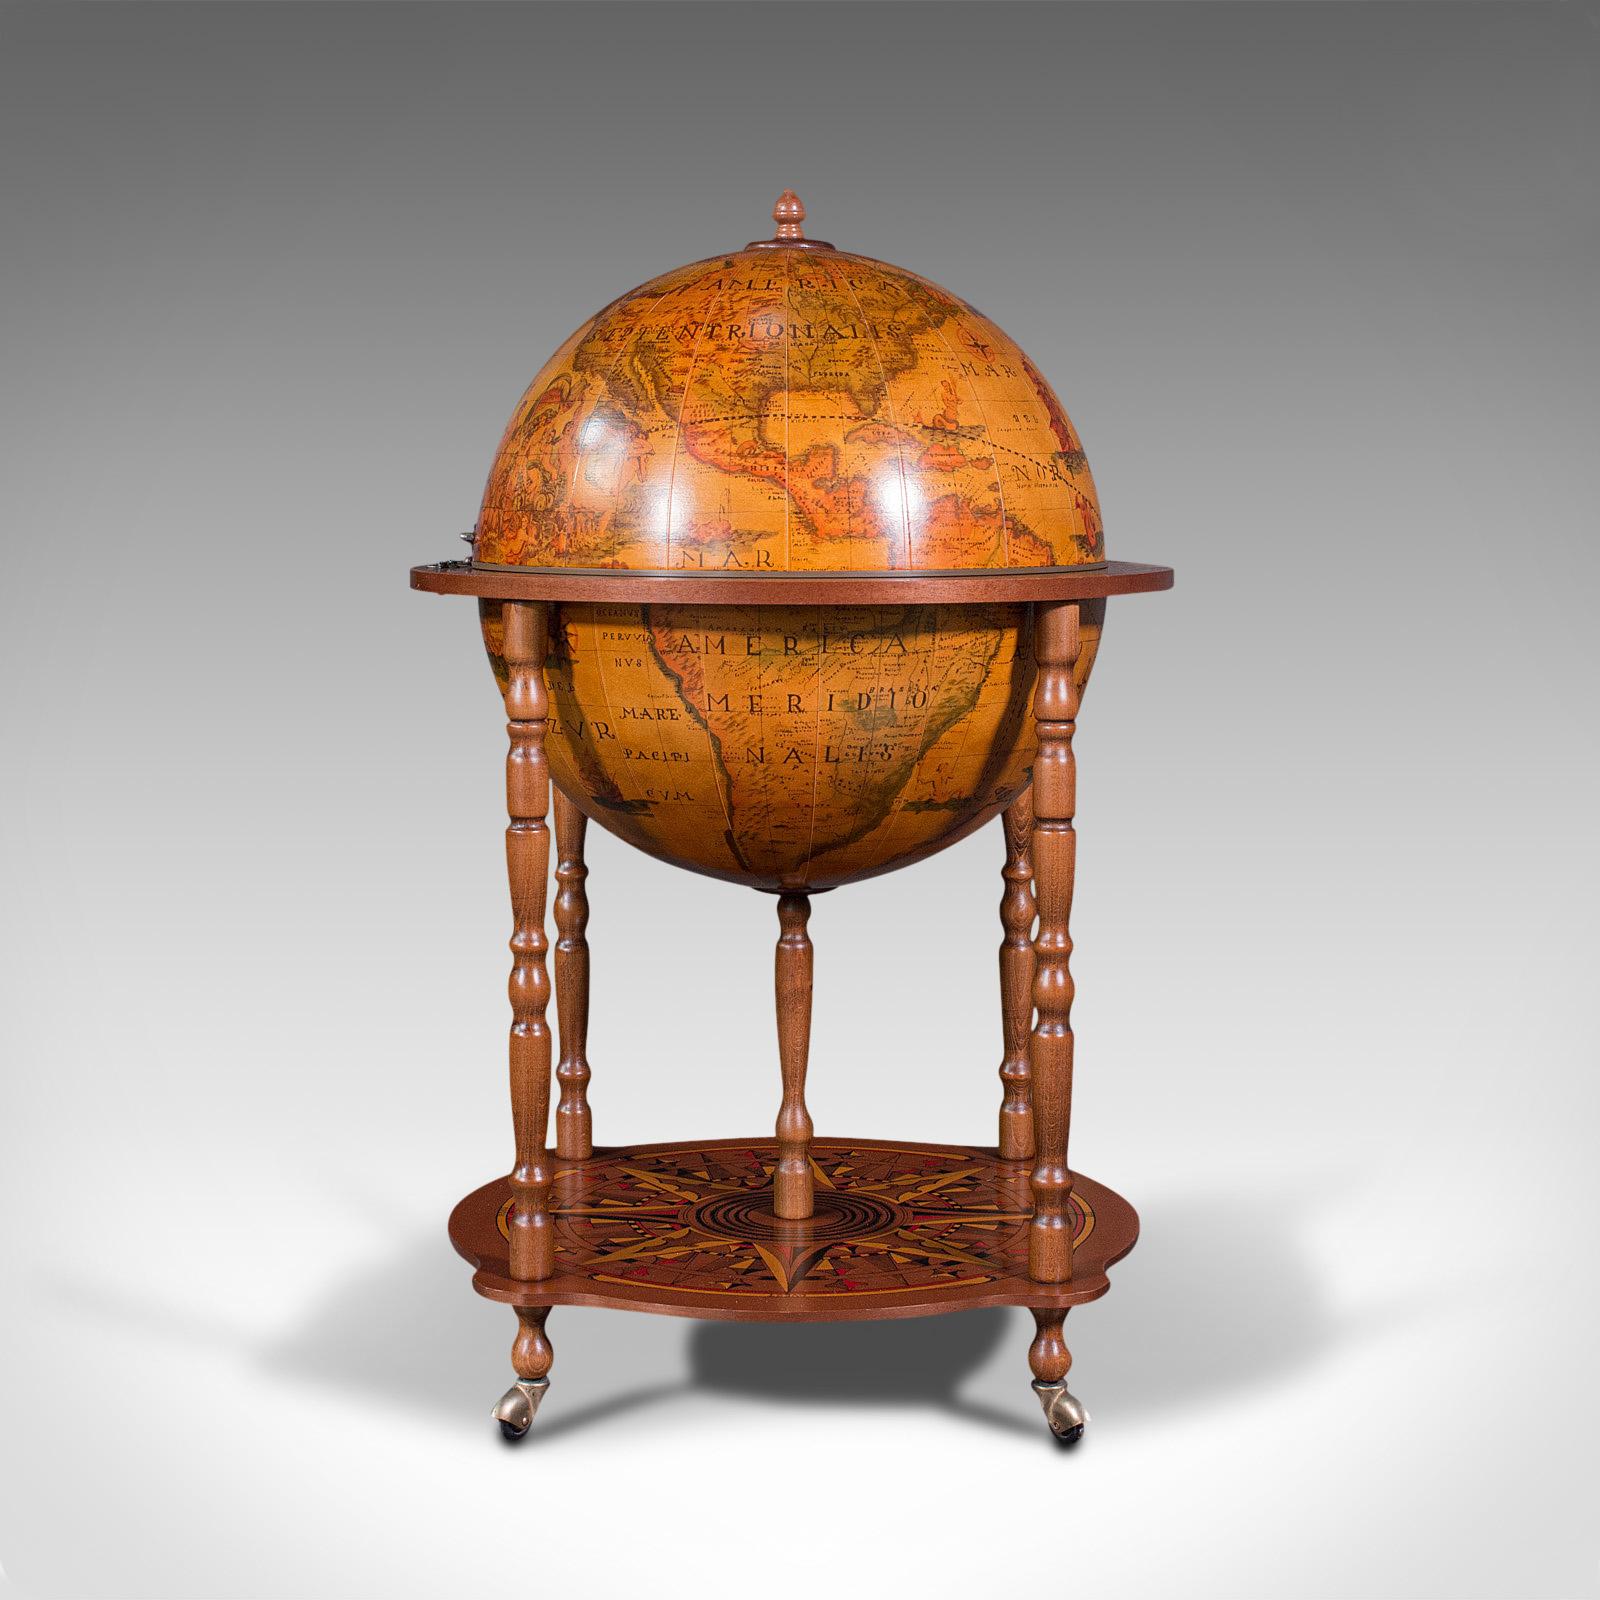 This is a vintage terrestrial drinks globe. A Continental, composite hardwood cocktail trolley cabinet, dating to the late 20th century, circa 1970.

Around the world in a responsible number of drinks
Displays a desirable aged patina and in good